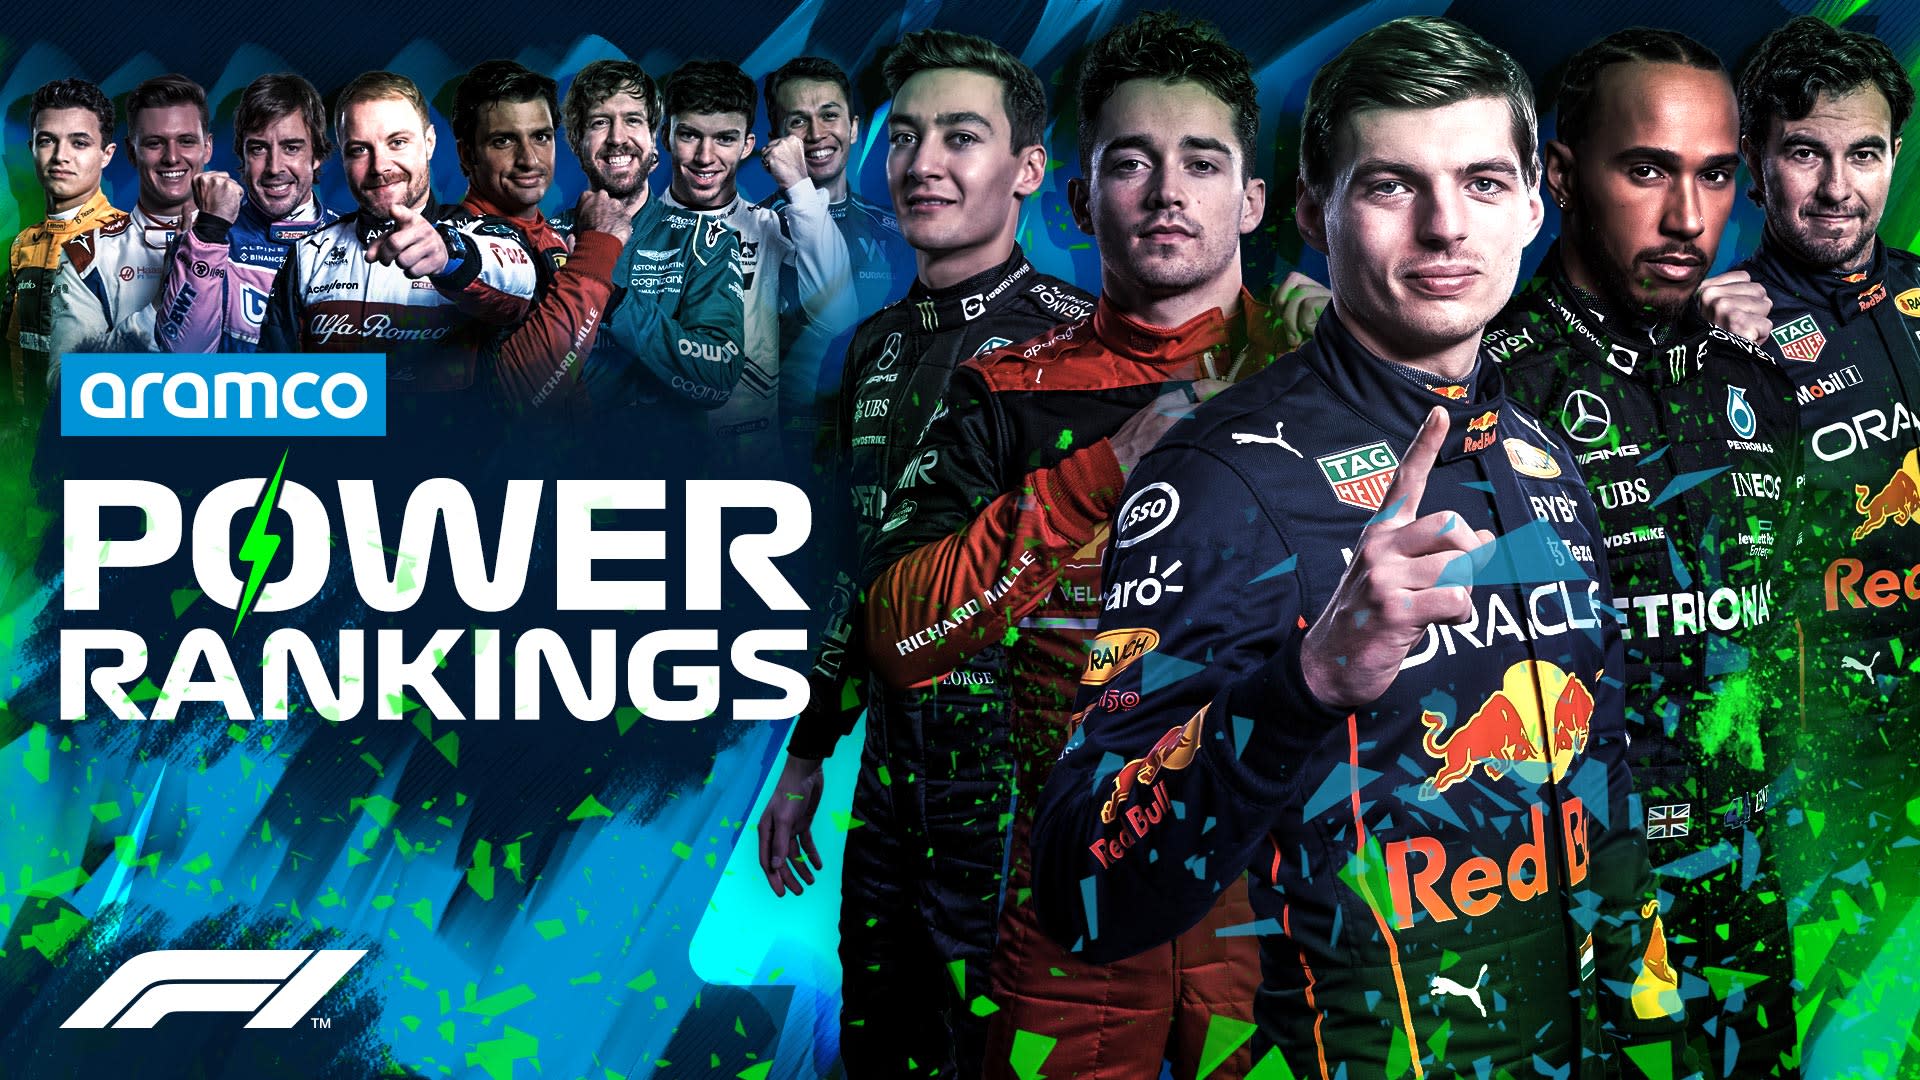 POWER RANKINGS How the drivers rank on the final overall leaderboard at the end of 2022 Formula 1®